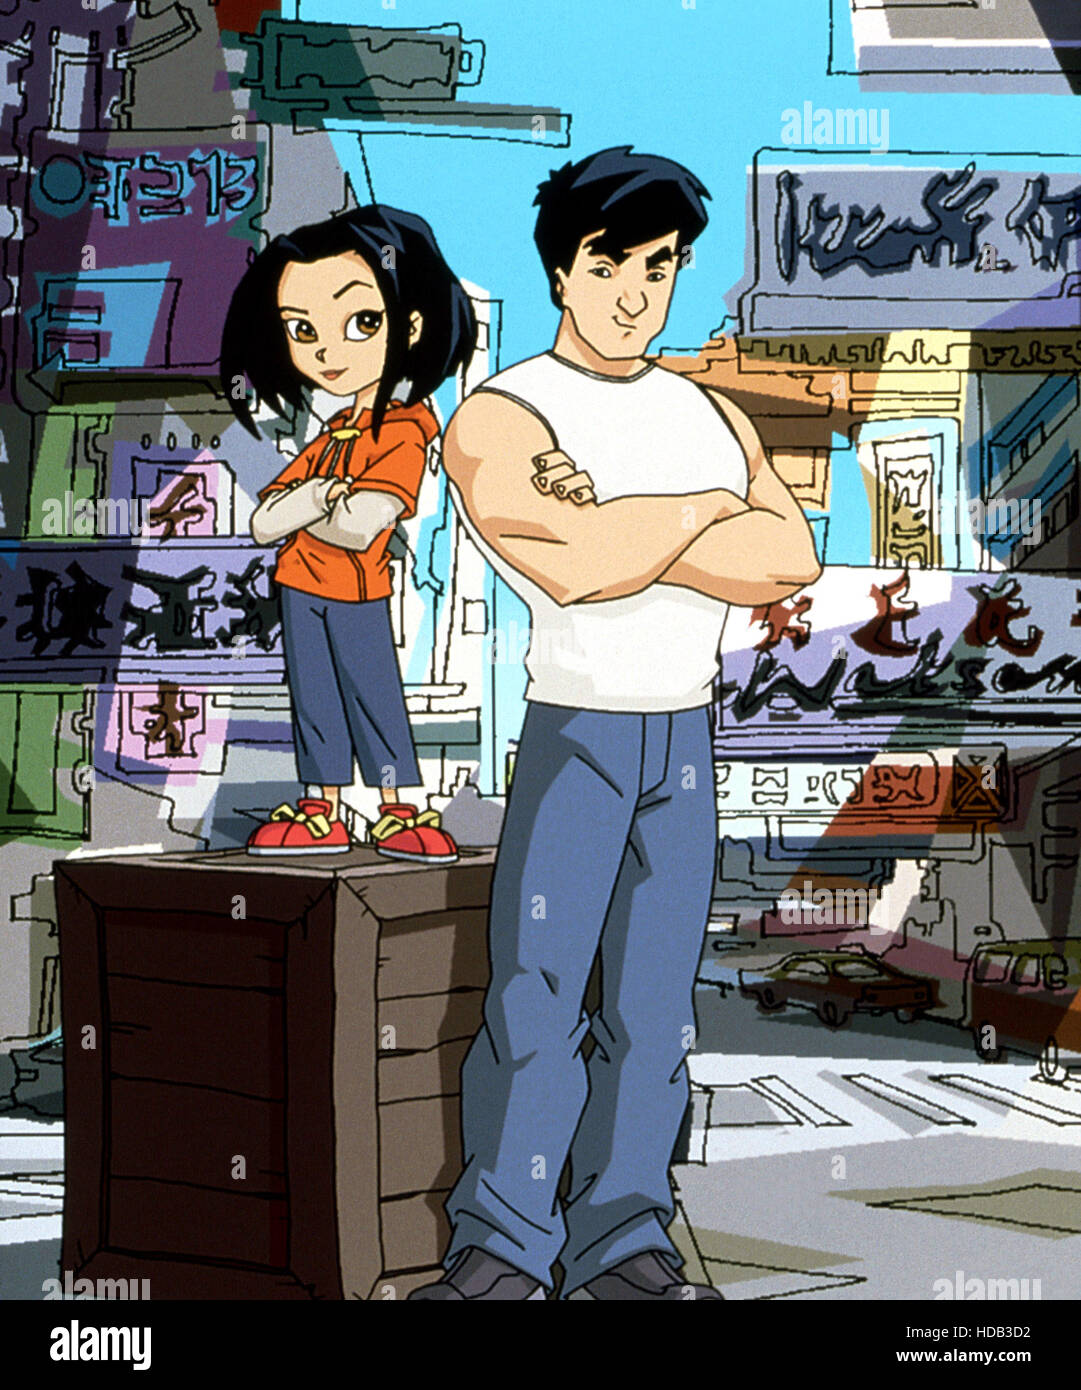 JACKIE CHAN ADVENTURES, (from left): Jade Chan, Jackie Chan, 2000 ...